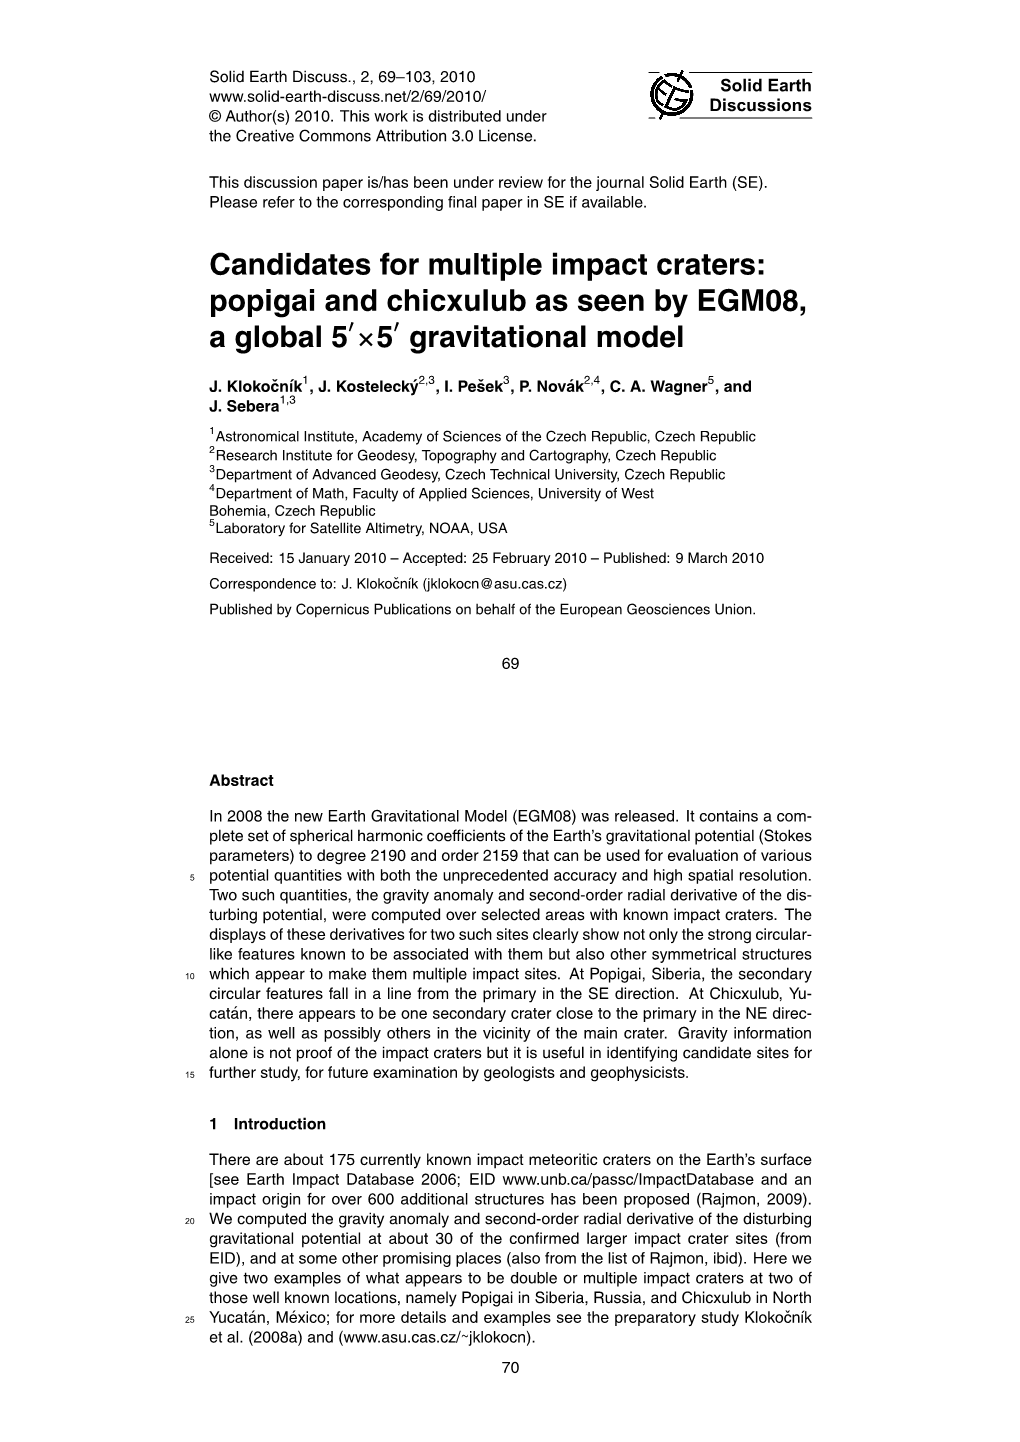 Candidates for Multiple Impact Craters: Popigai and Chicxulub As Seen by EGM08, a Global 50×50 Gravitational Model